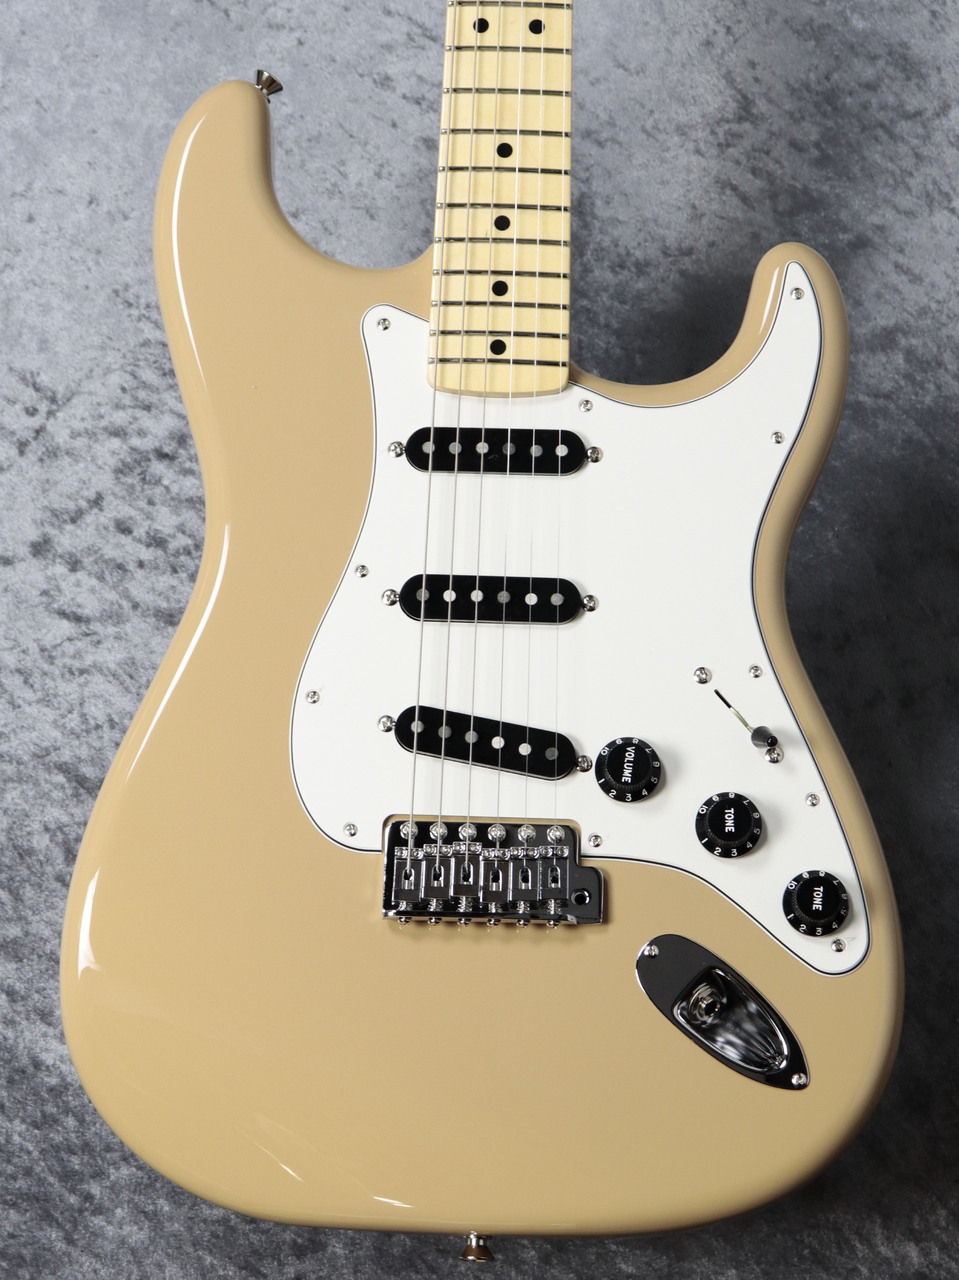 Fender Made in Japan Limited International Color Stratocaster -Sahara Taupe-  #JD22009695【3.31kg】（新品/送料無料）【楽器検索デジマート】